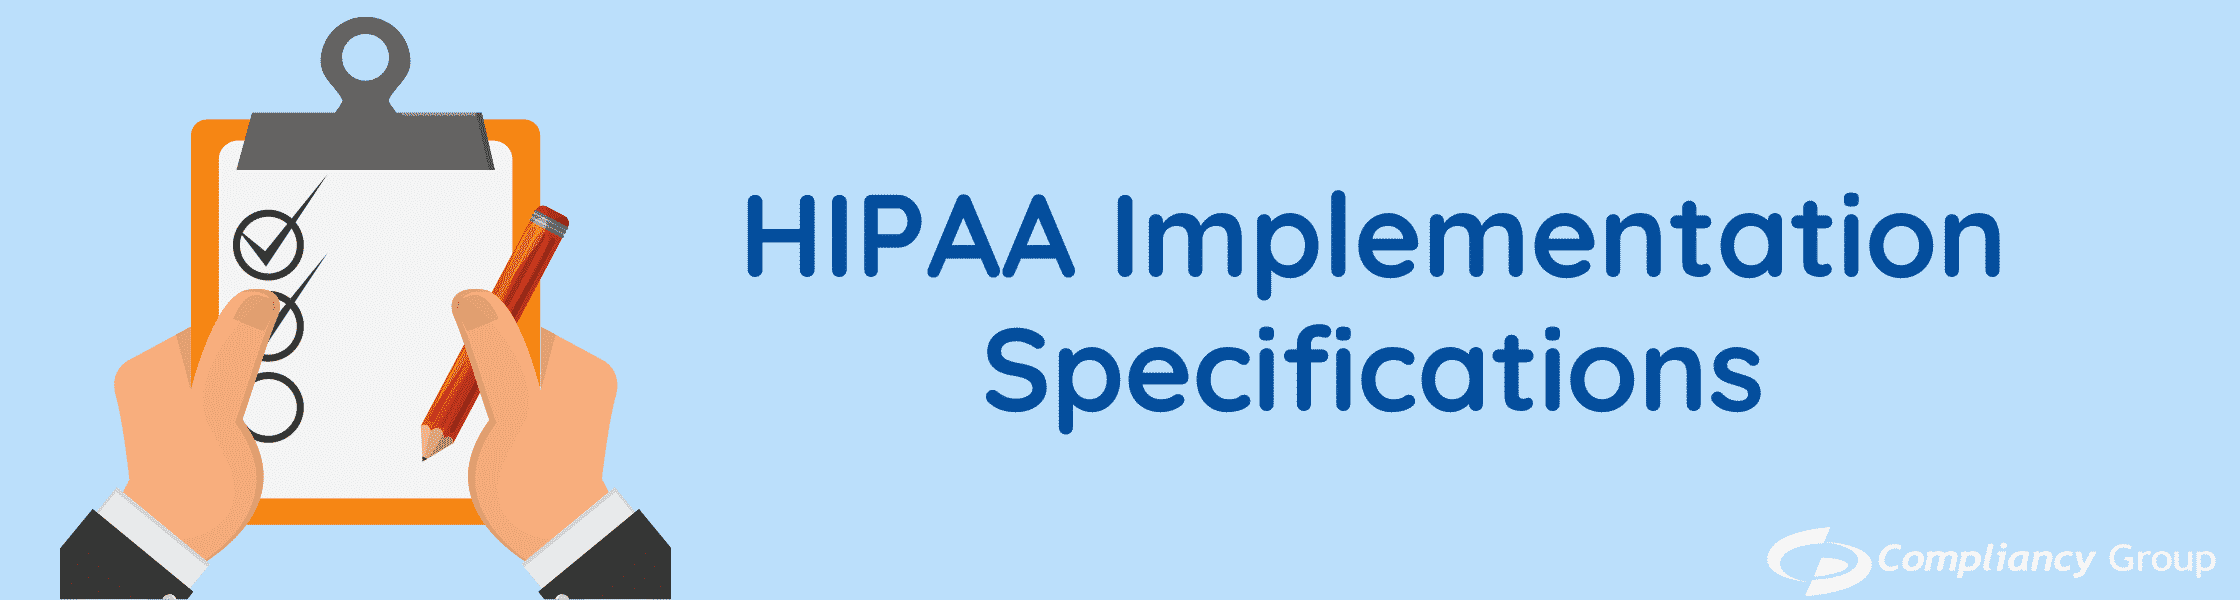 HIPAA Implementation Specifications